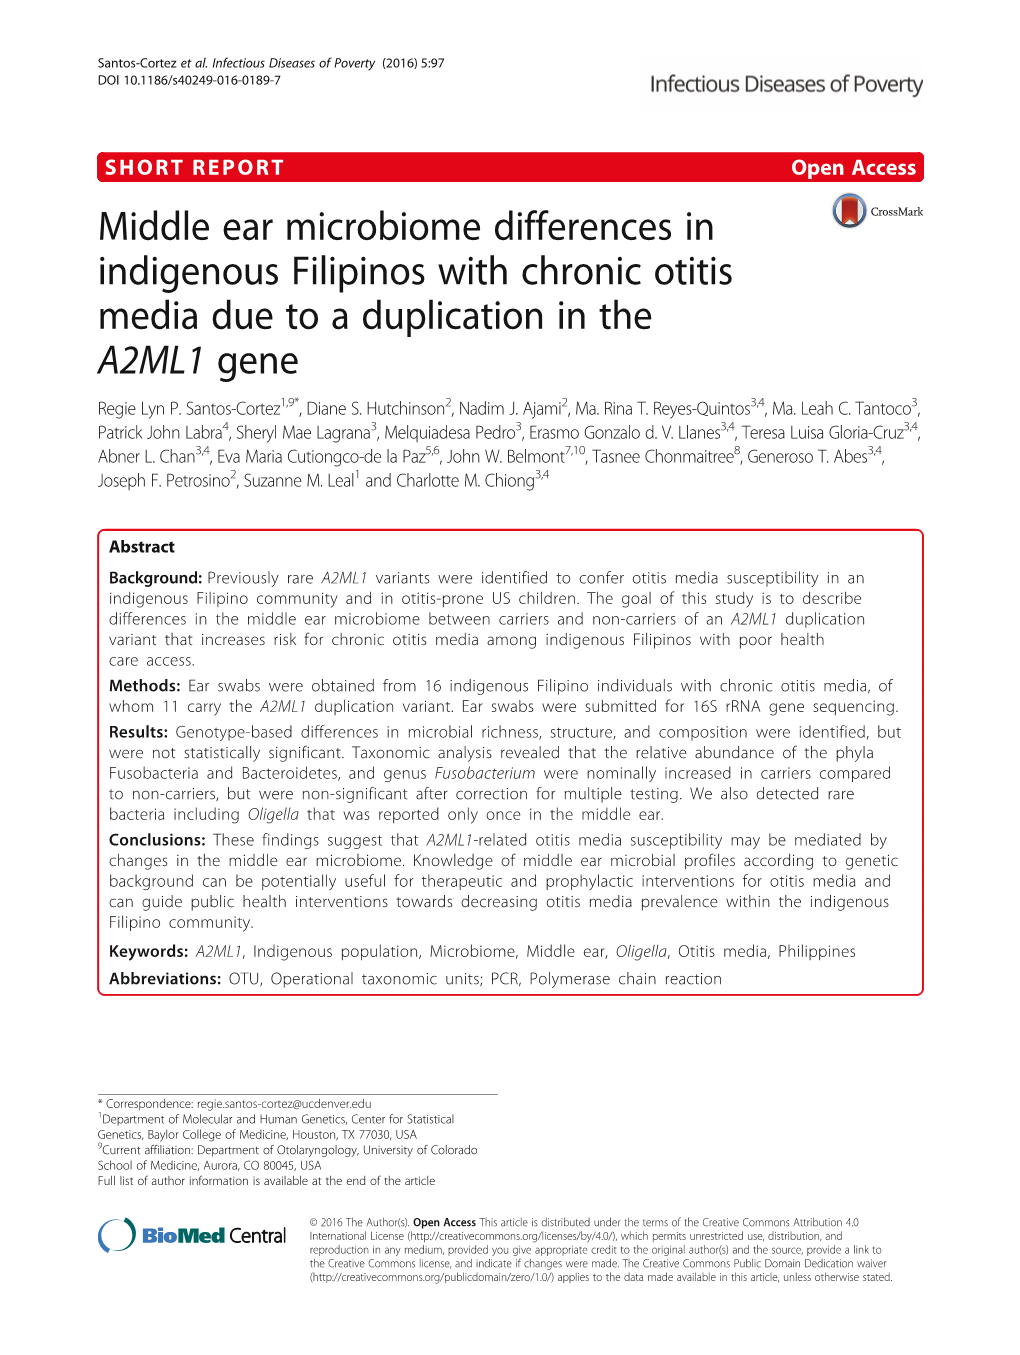 Middle Ear Microbiome Differences in Indigenous Filipinos with Chronic Otitis Media Due to a Duplication in the A2ML1 Gene Regie Lyn P